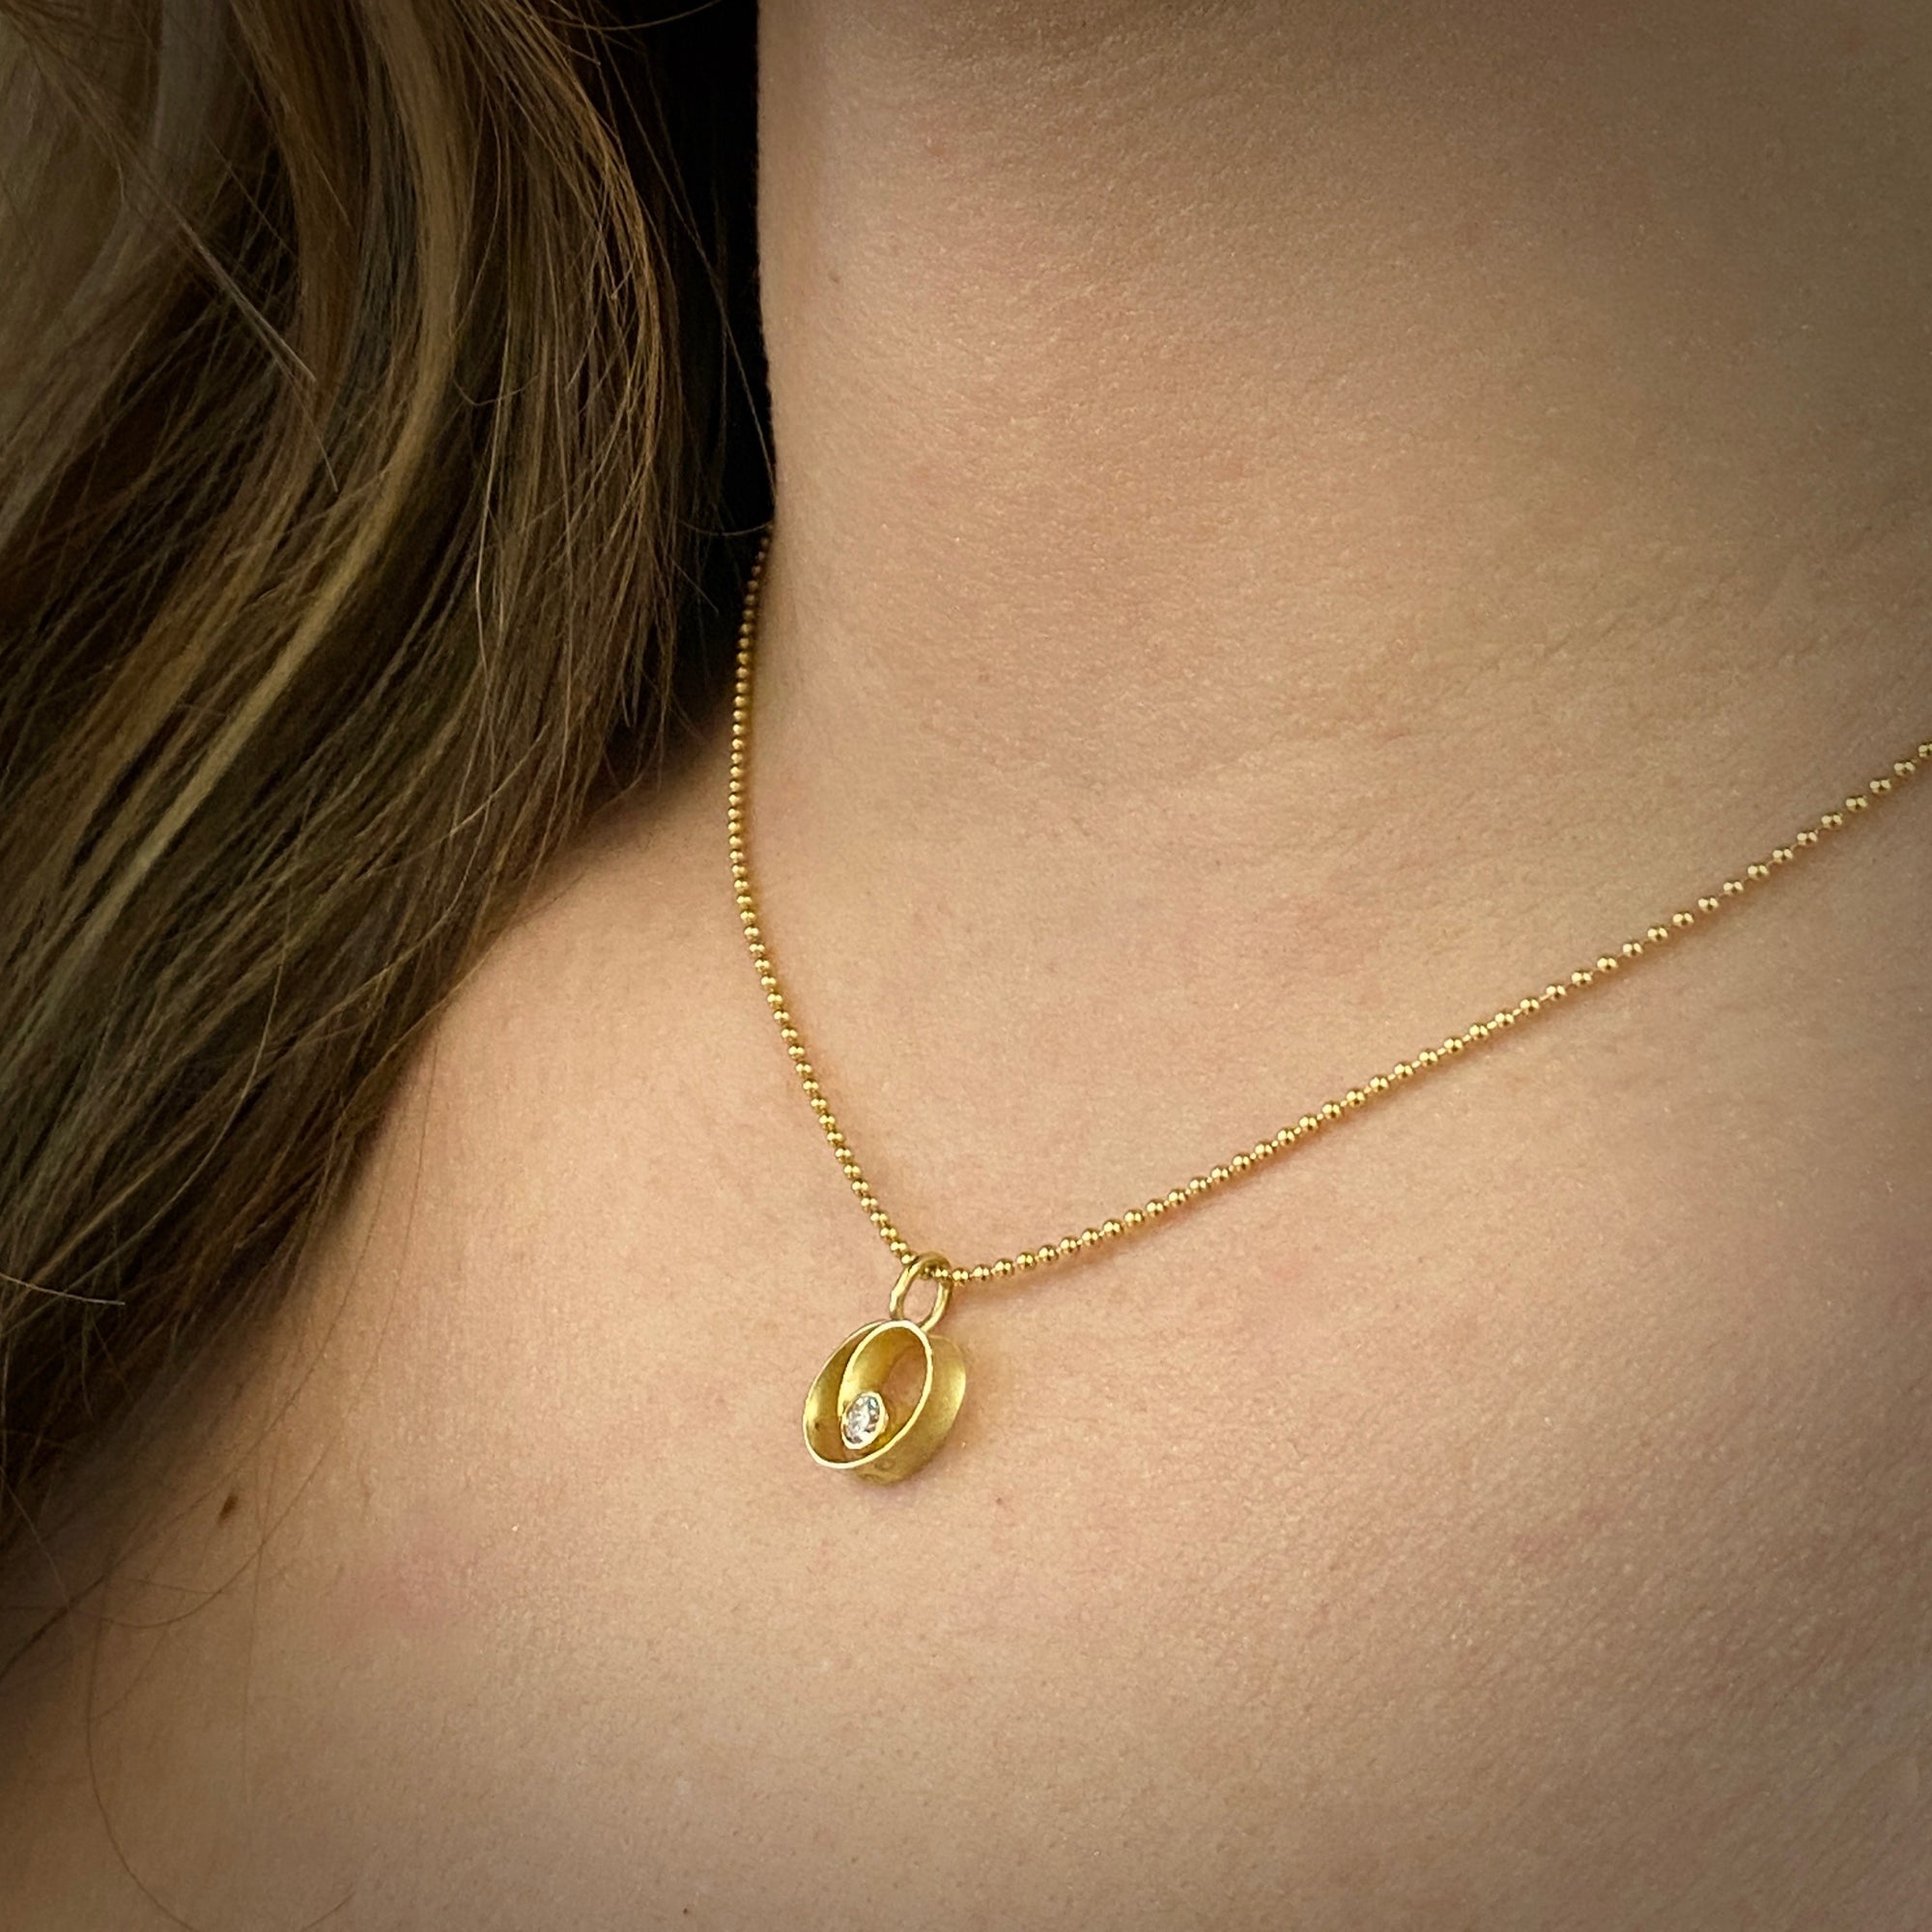 Coil style pendant in 18K yellow gold with diamond by Ayesha Mayadas